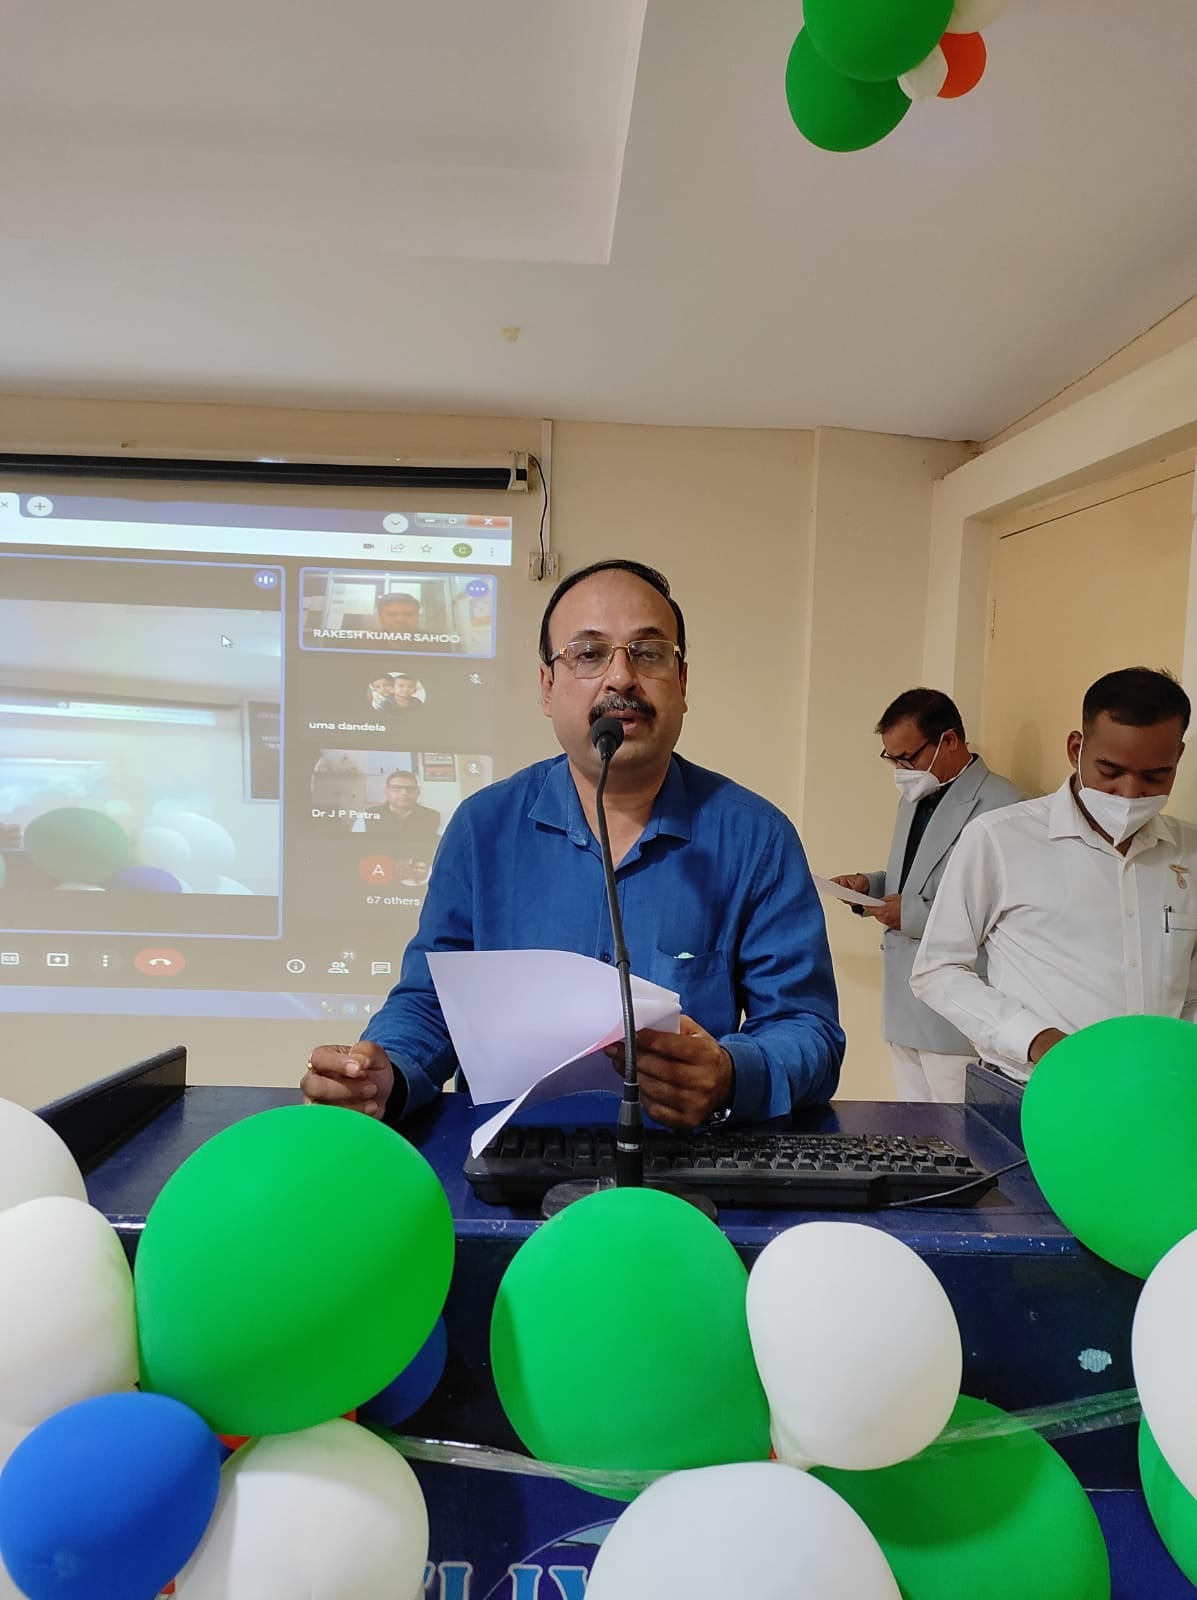 Inaugural Session of National Level webinar on the topic ‘Key technology in wireless communication: AI (Artificial Intelligence) the frontliner’ organized on 11th February 2022, through Google Meet in which Prof. (Dr.) J. P Patra, Professor, SSIPMT, Raipur, CSVTU, Bhilai, Chhattisgarh, joined as Chief Resource Person. In his address during the first technical session, he discussed how artificial intelligence leverages computers and machines to mimic the problem-solving and decision-making capabilities of the human mind. The human approach to artificial intelligence is going to touch bearers in every aspect of our lives in the days ahead. At its simplest form, it is a field, which combines computer science and robust datasets, to enable problem-solving in numerous real-world applications. In technical session II, one national level quiz was conducted.
At the beginning of the inaugural session, welcome Address was given by Prof. (Dr.) Loknath Sarangi, Convener - NWKTWC – 2022. In his address Prof. (Dr.) Sadasiv Dash, Registrar  COEB, Address by Prof. (Dr.) Subrat Kumar Mohanty, Principal COEB, and Address by Prof. (Dr.) Sujit Kumar Khuntia, Dean R&D, COEB explained about the utilities of wireless communication and relevance of artificial intelligence. At the end, the vote of thanks proposed by Prof. Snehasis Dey, Convener - NWKTWC – 2022. Around 80 students, research scholars, and faculties from numerous institutes of India have participated in this webinar.